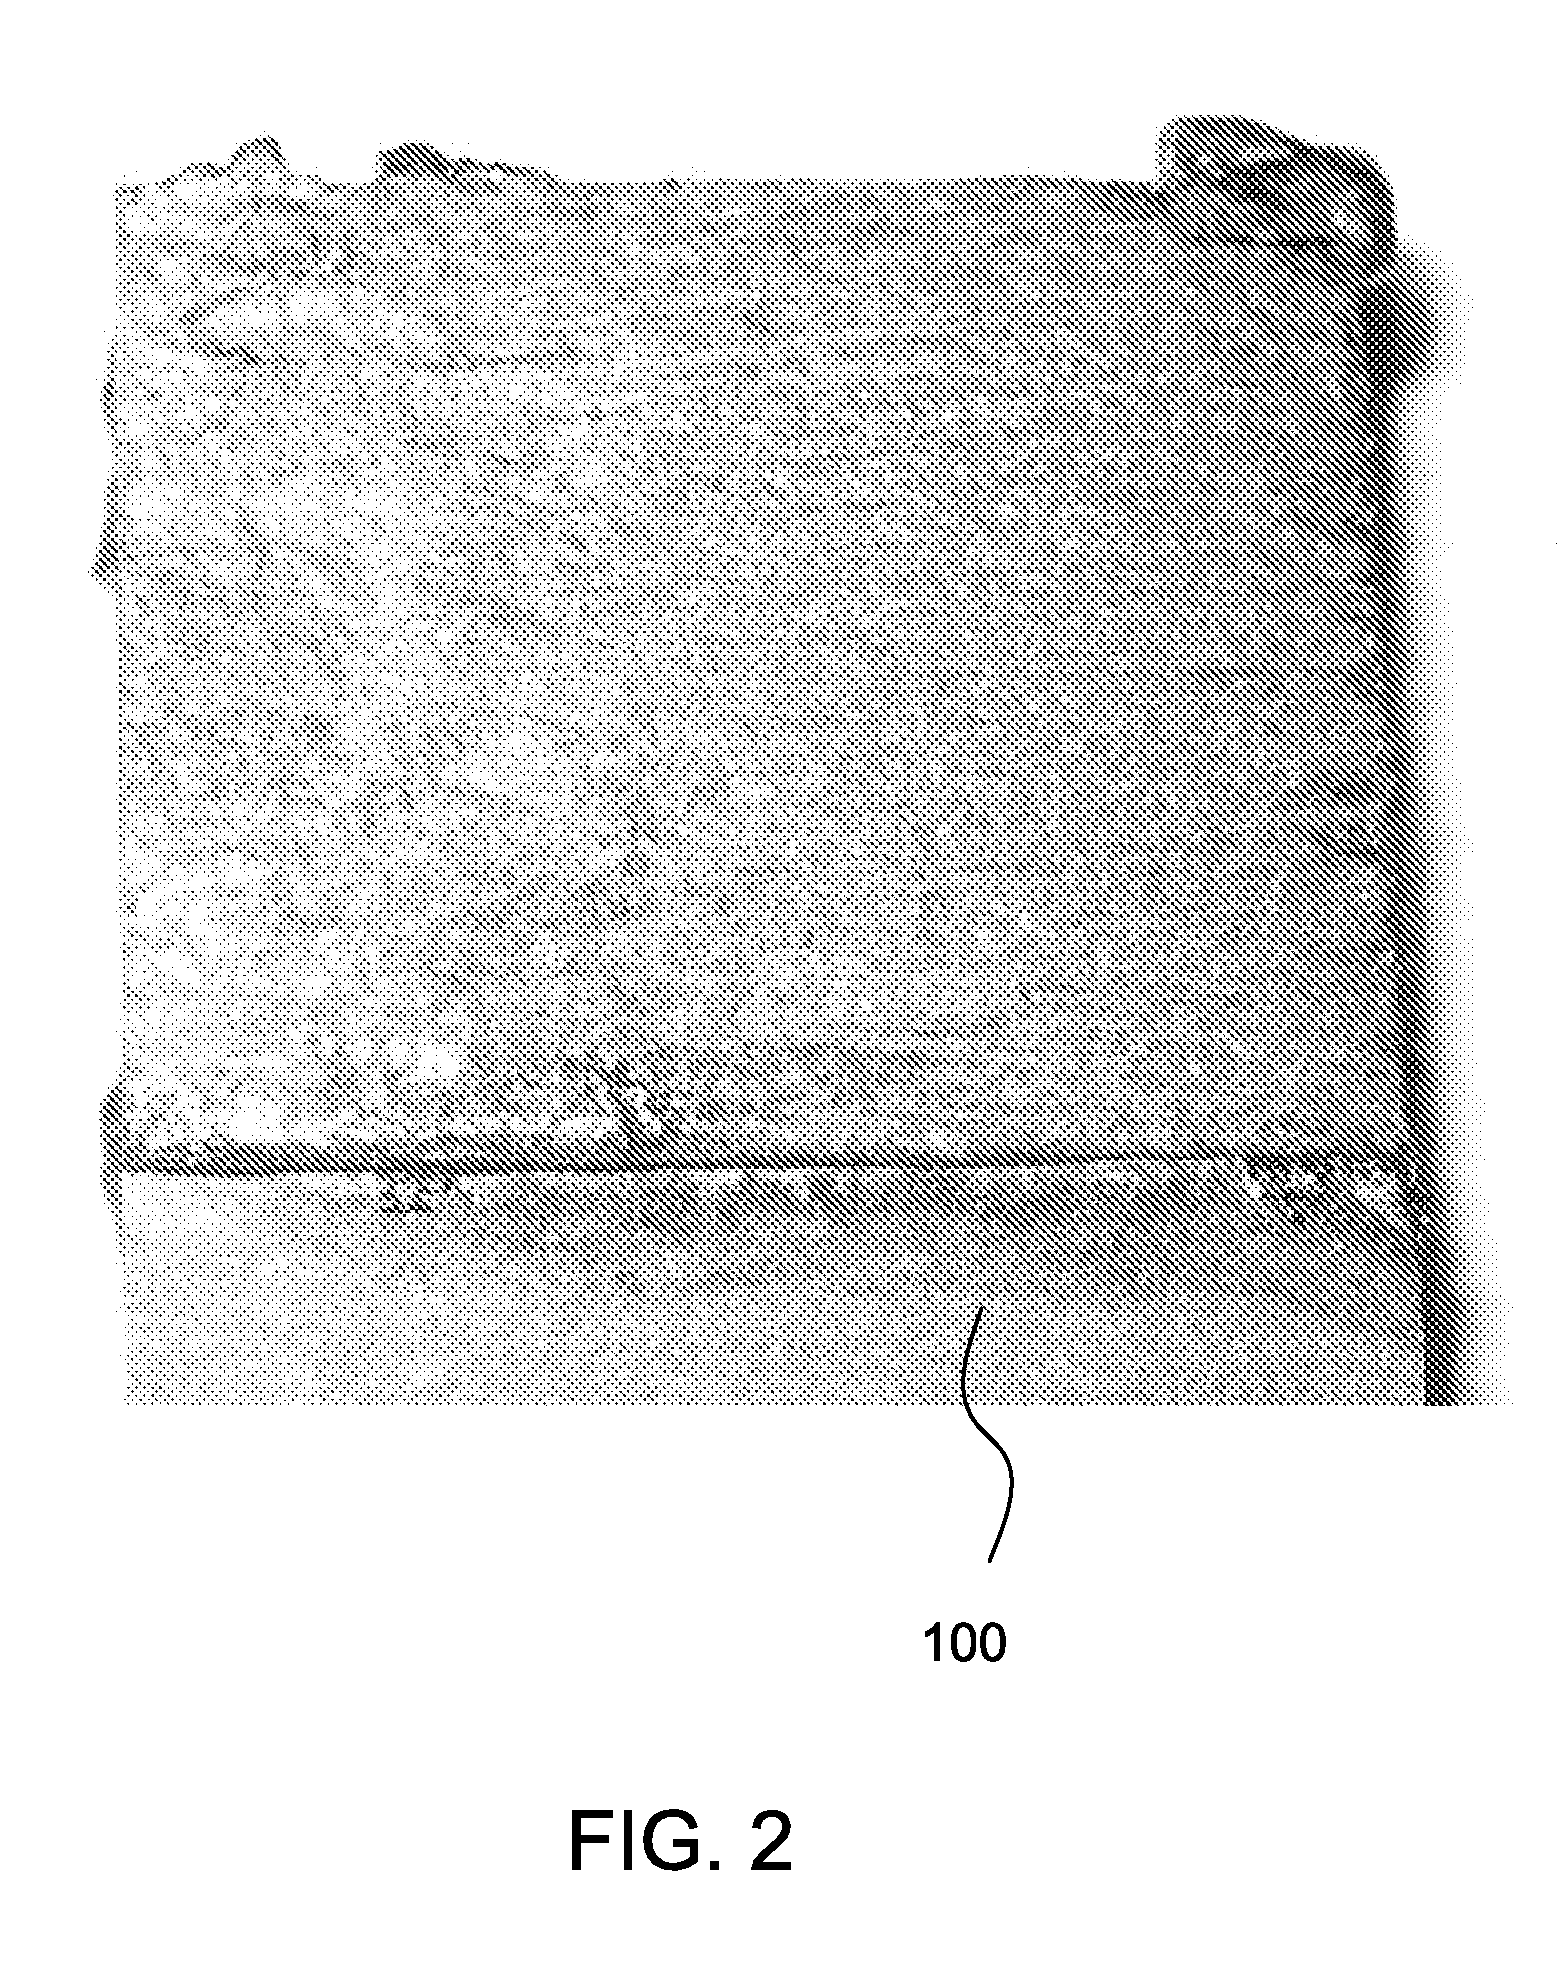 Electroerosion machining systems and methods